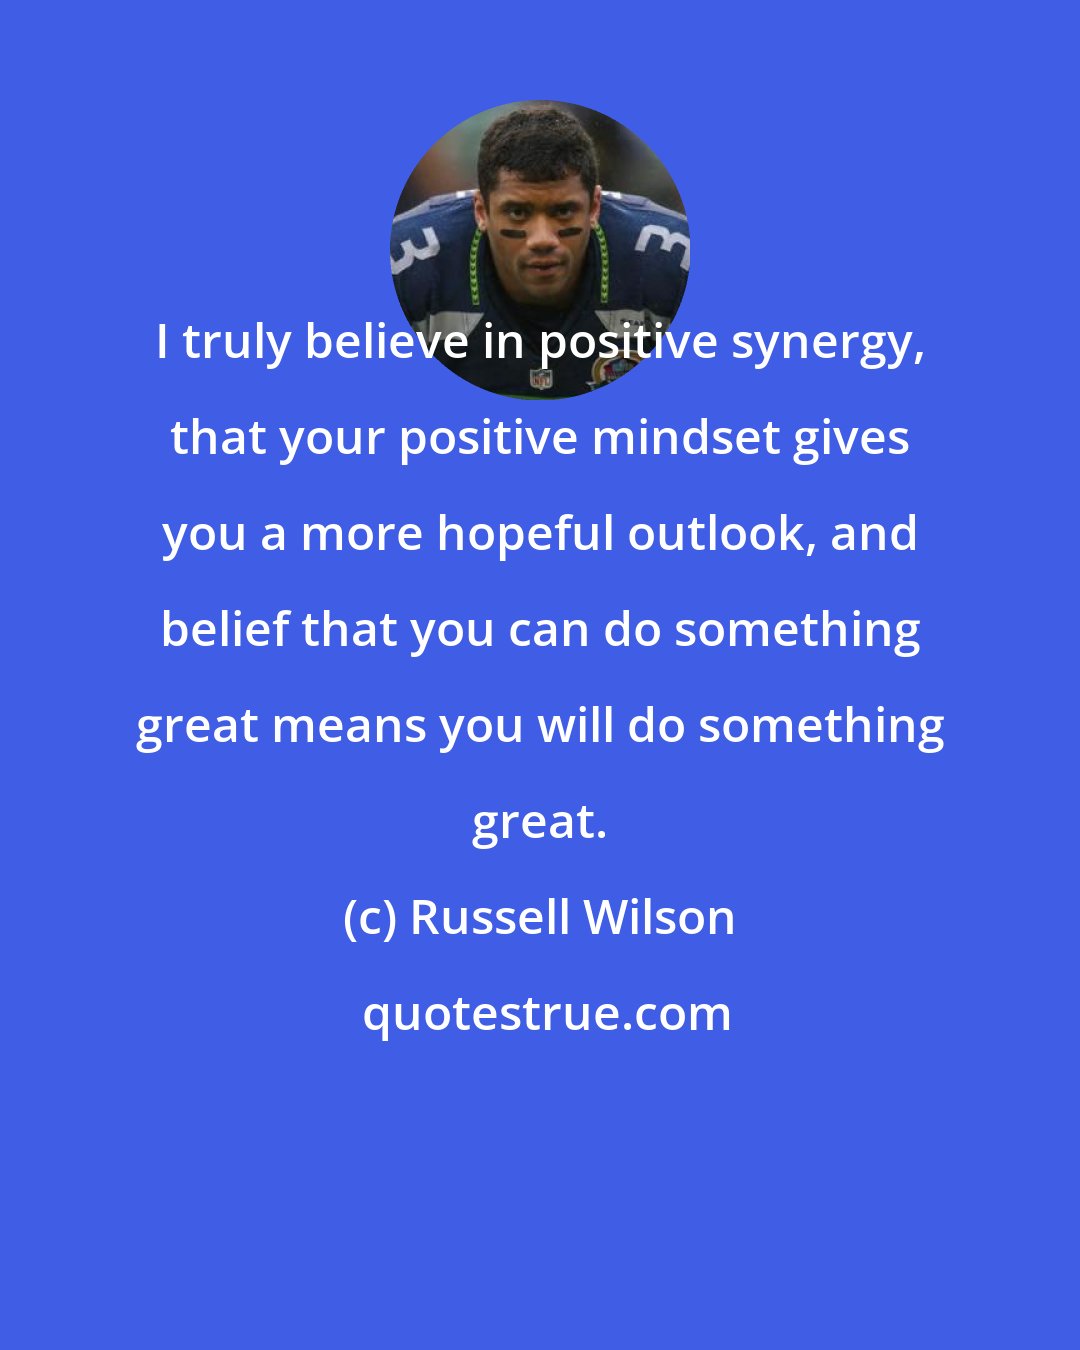 Russell Wilson: I truly believe in positive synergy, that your positive mindset gives you a more hopeful outlook, and belief that you can do something great means you will do something great.